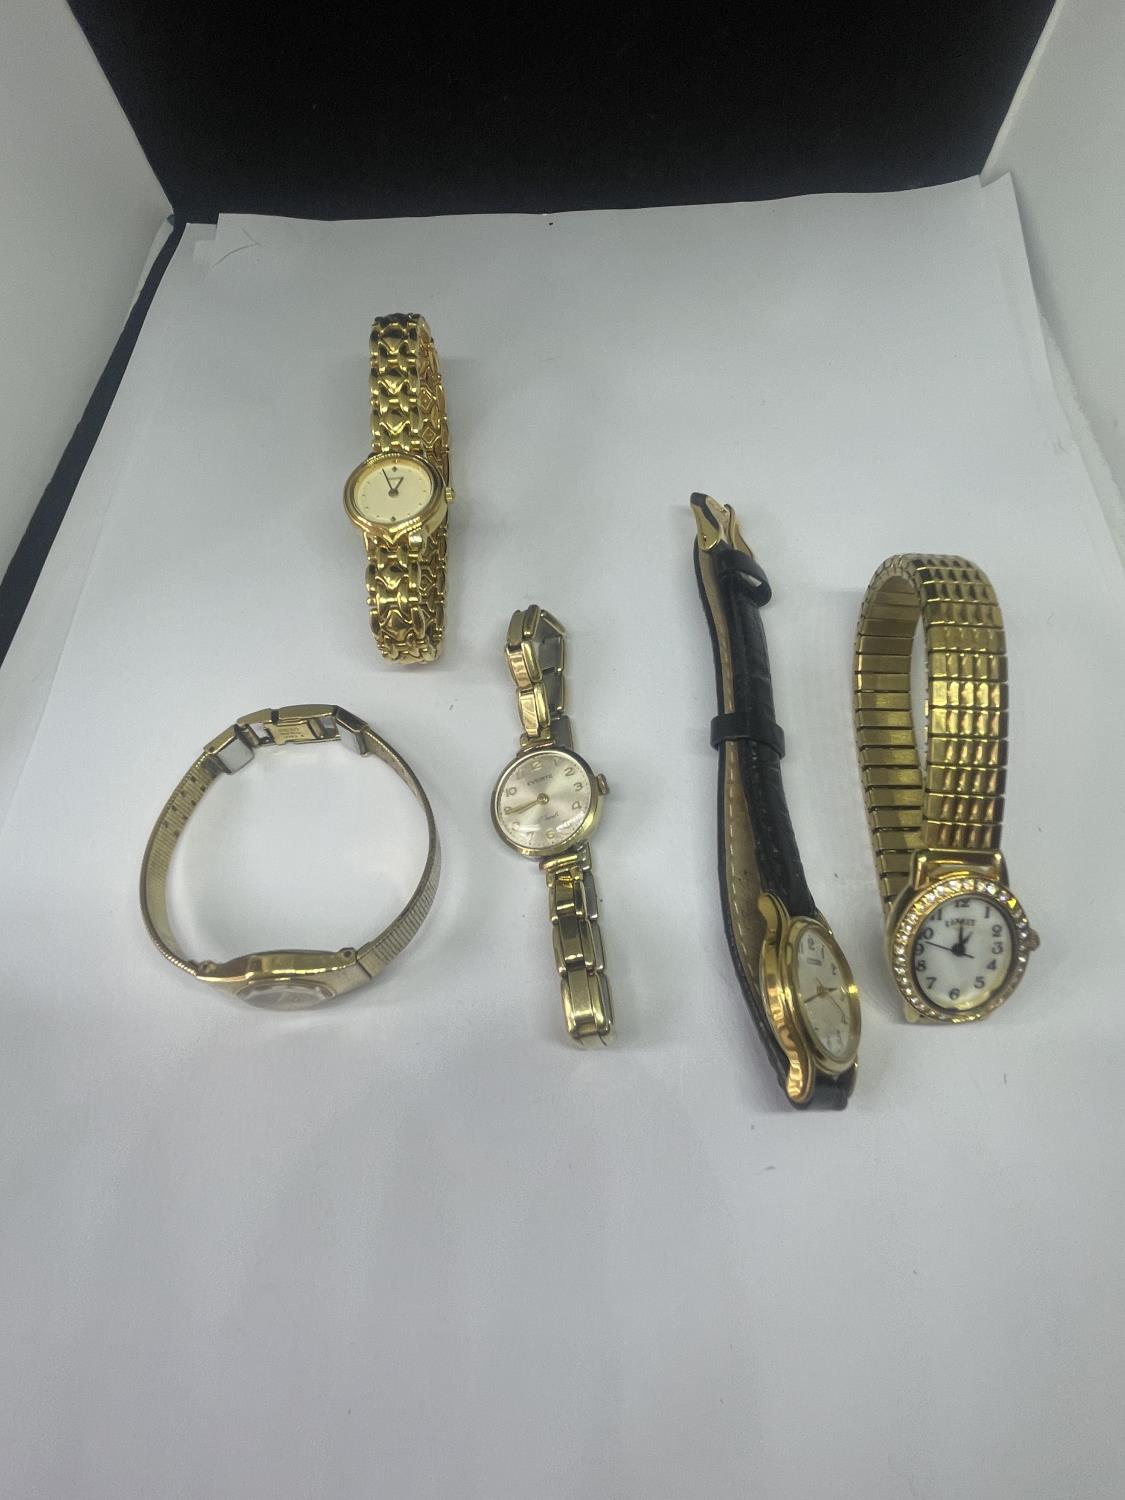 A QUANTITY OF WRIST WATCHES